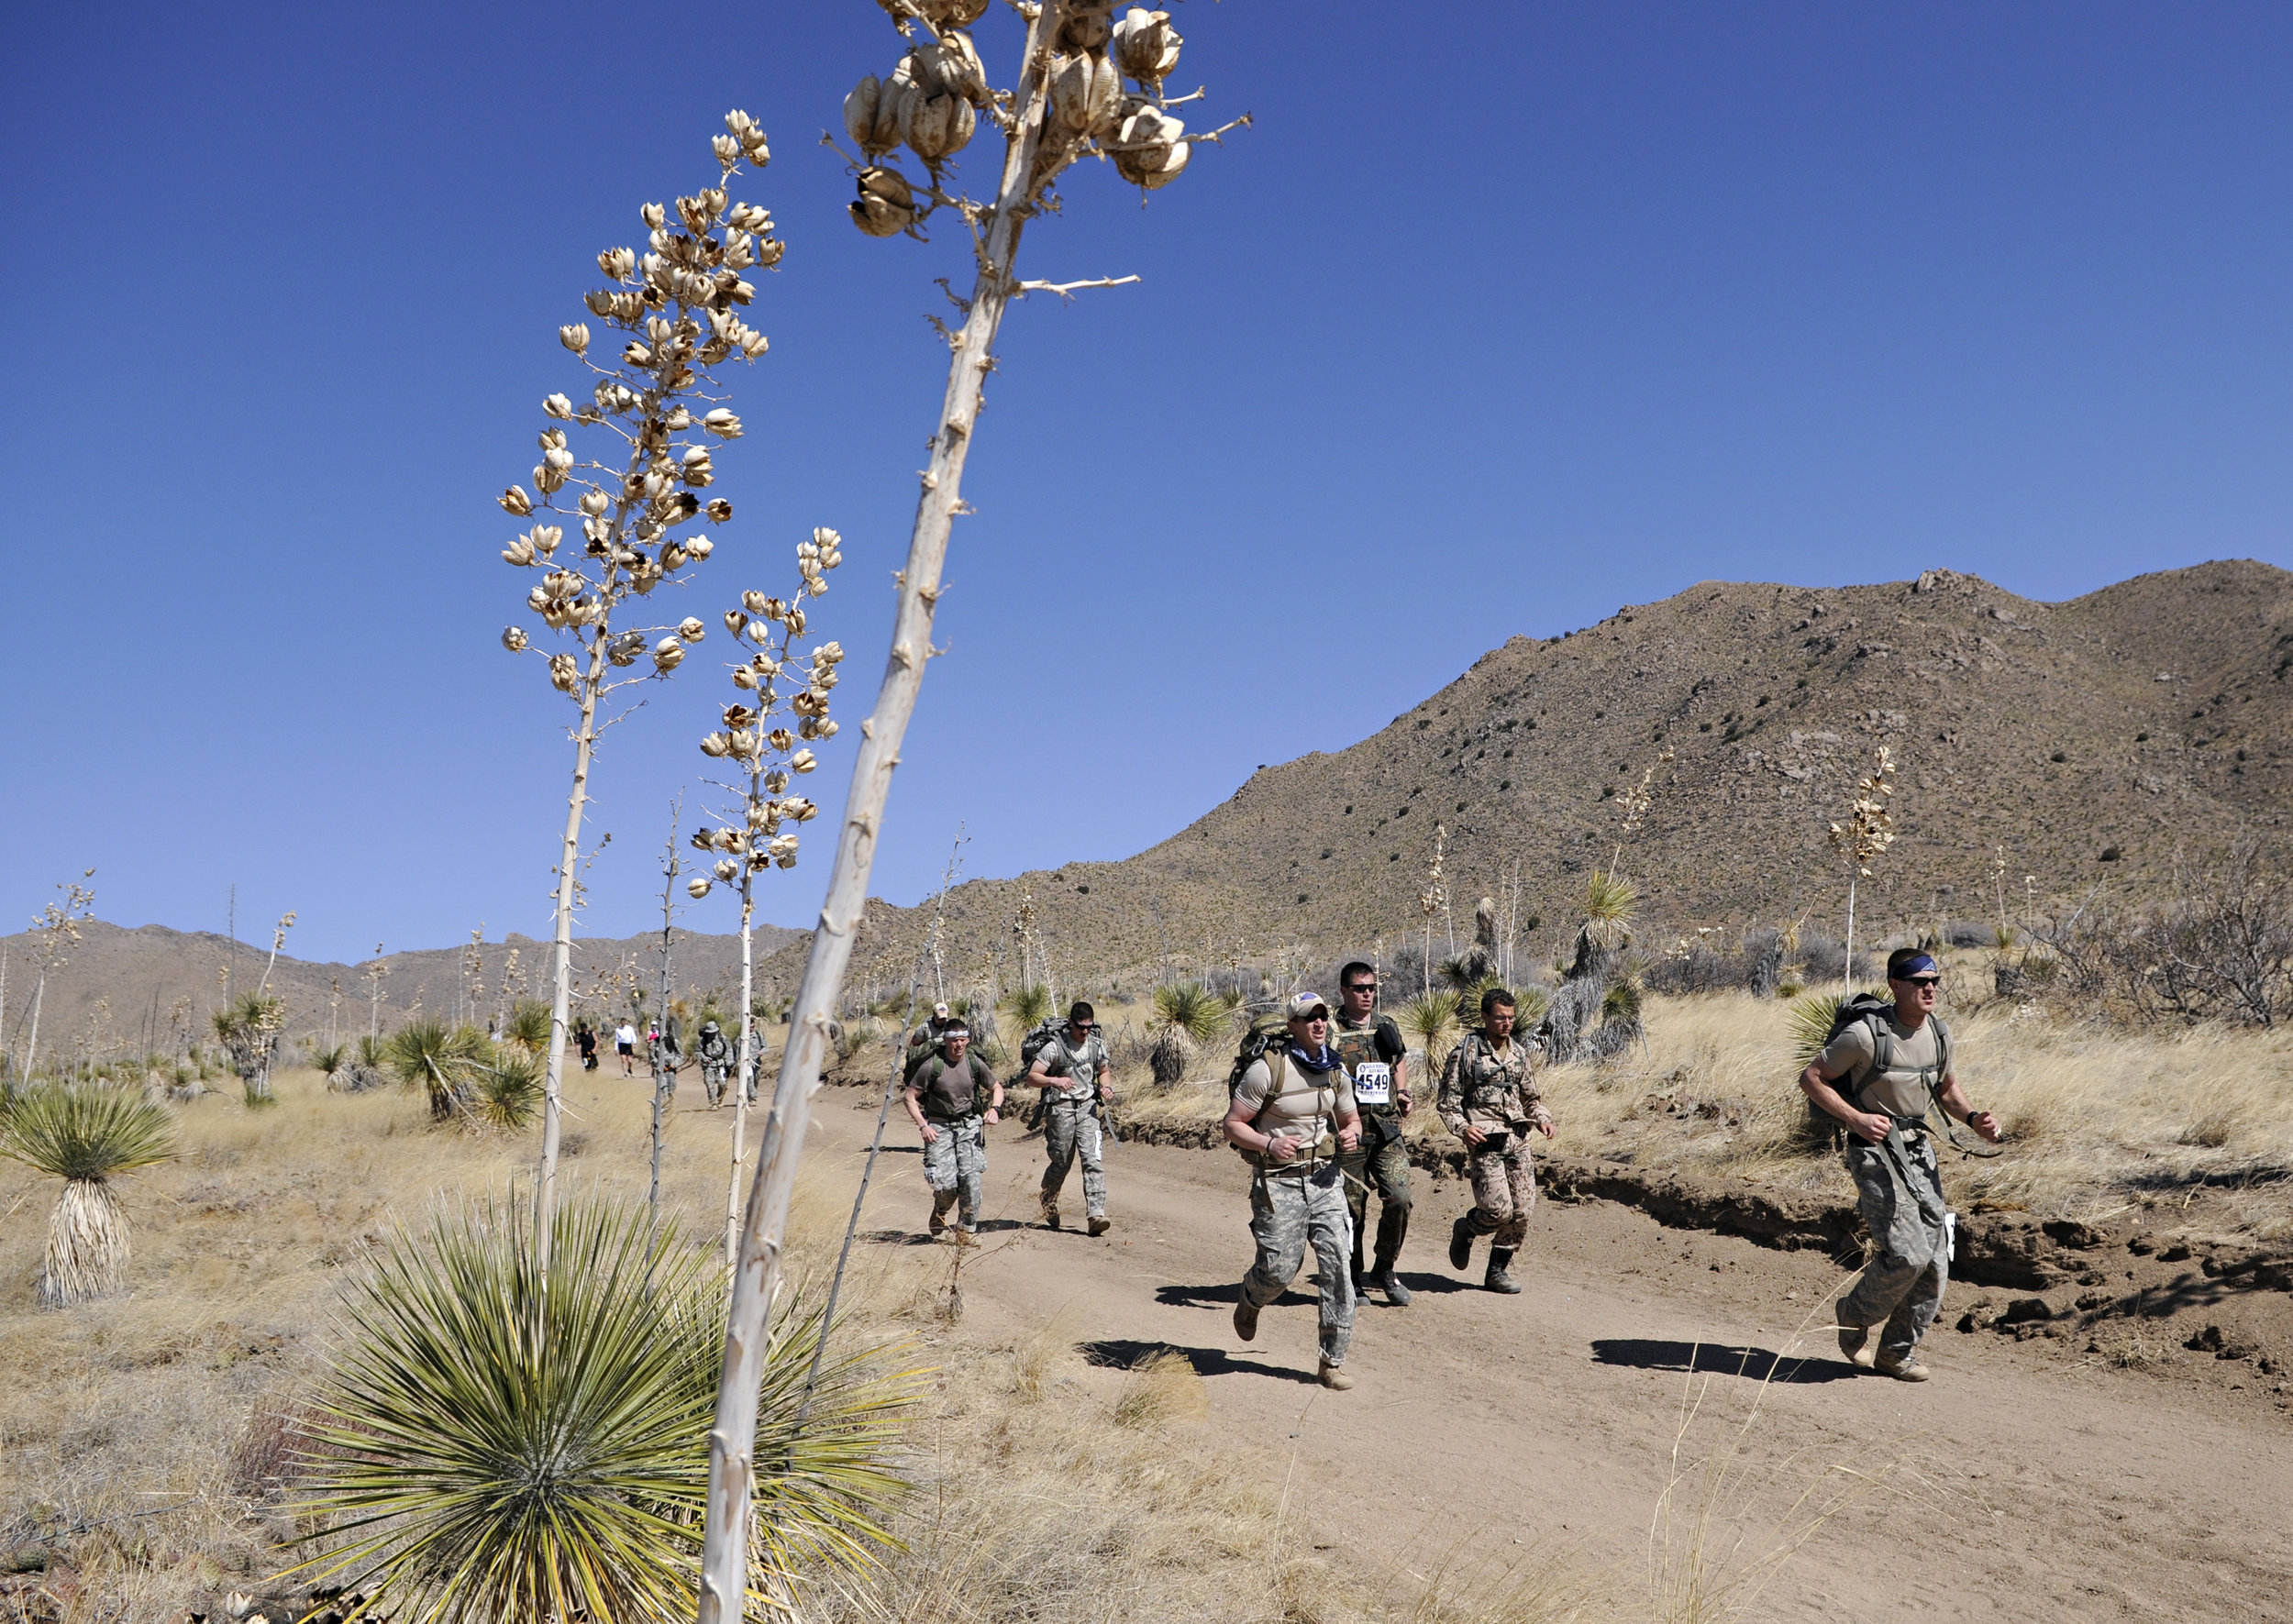  Runners pass by tall yuccas during the 22nd Annual Bataan Memorial Death March at White Sands Missile Range, Sunday, March 27, 2011. (Morgan Petroski/Albuquerque Journal) 